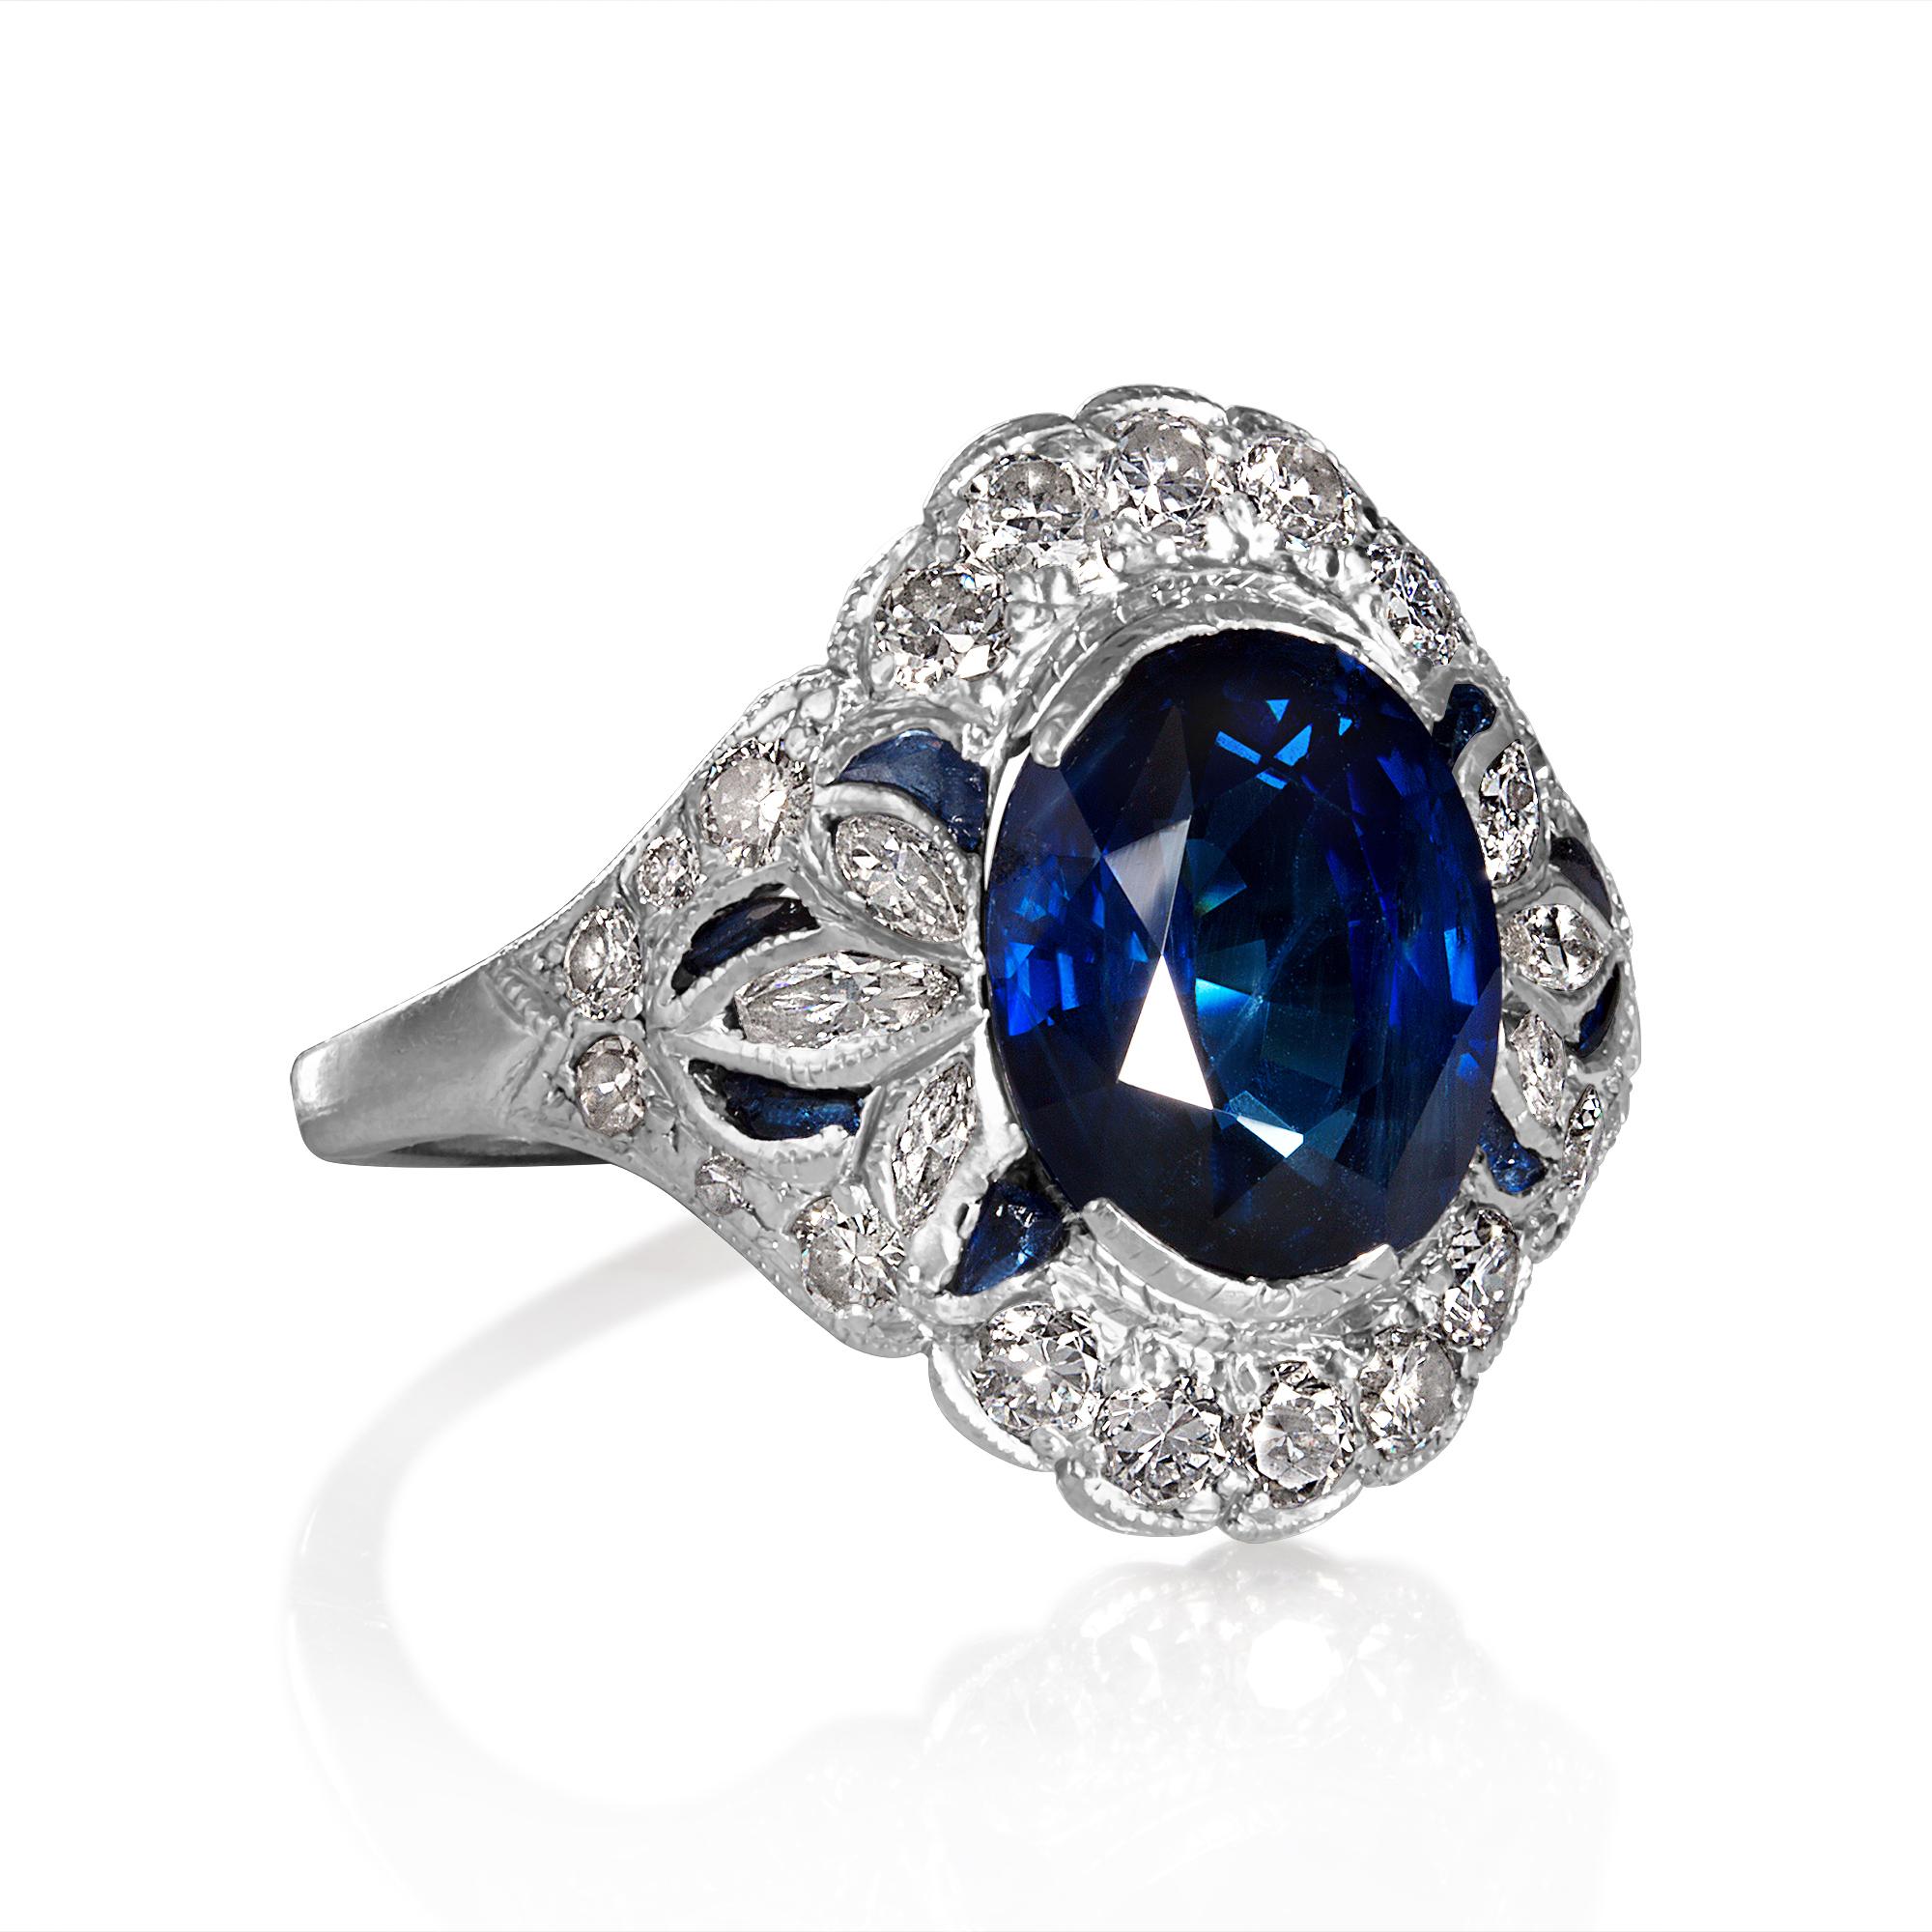 This Striking Authentic ART DECO , Circa 1917-1920, an exquisite handcrafted dinner ring featuring Ocean Blue Oval Cut Sapphire with European-Marquise cut, old cut diamonds and French cut blue sapphires in Platinum.

Shy 5.0carat (4.90ct) Natural